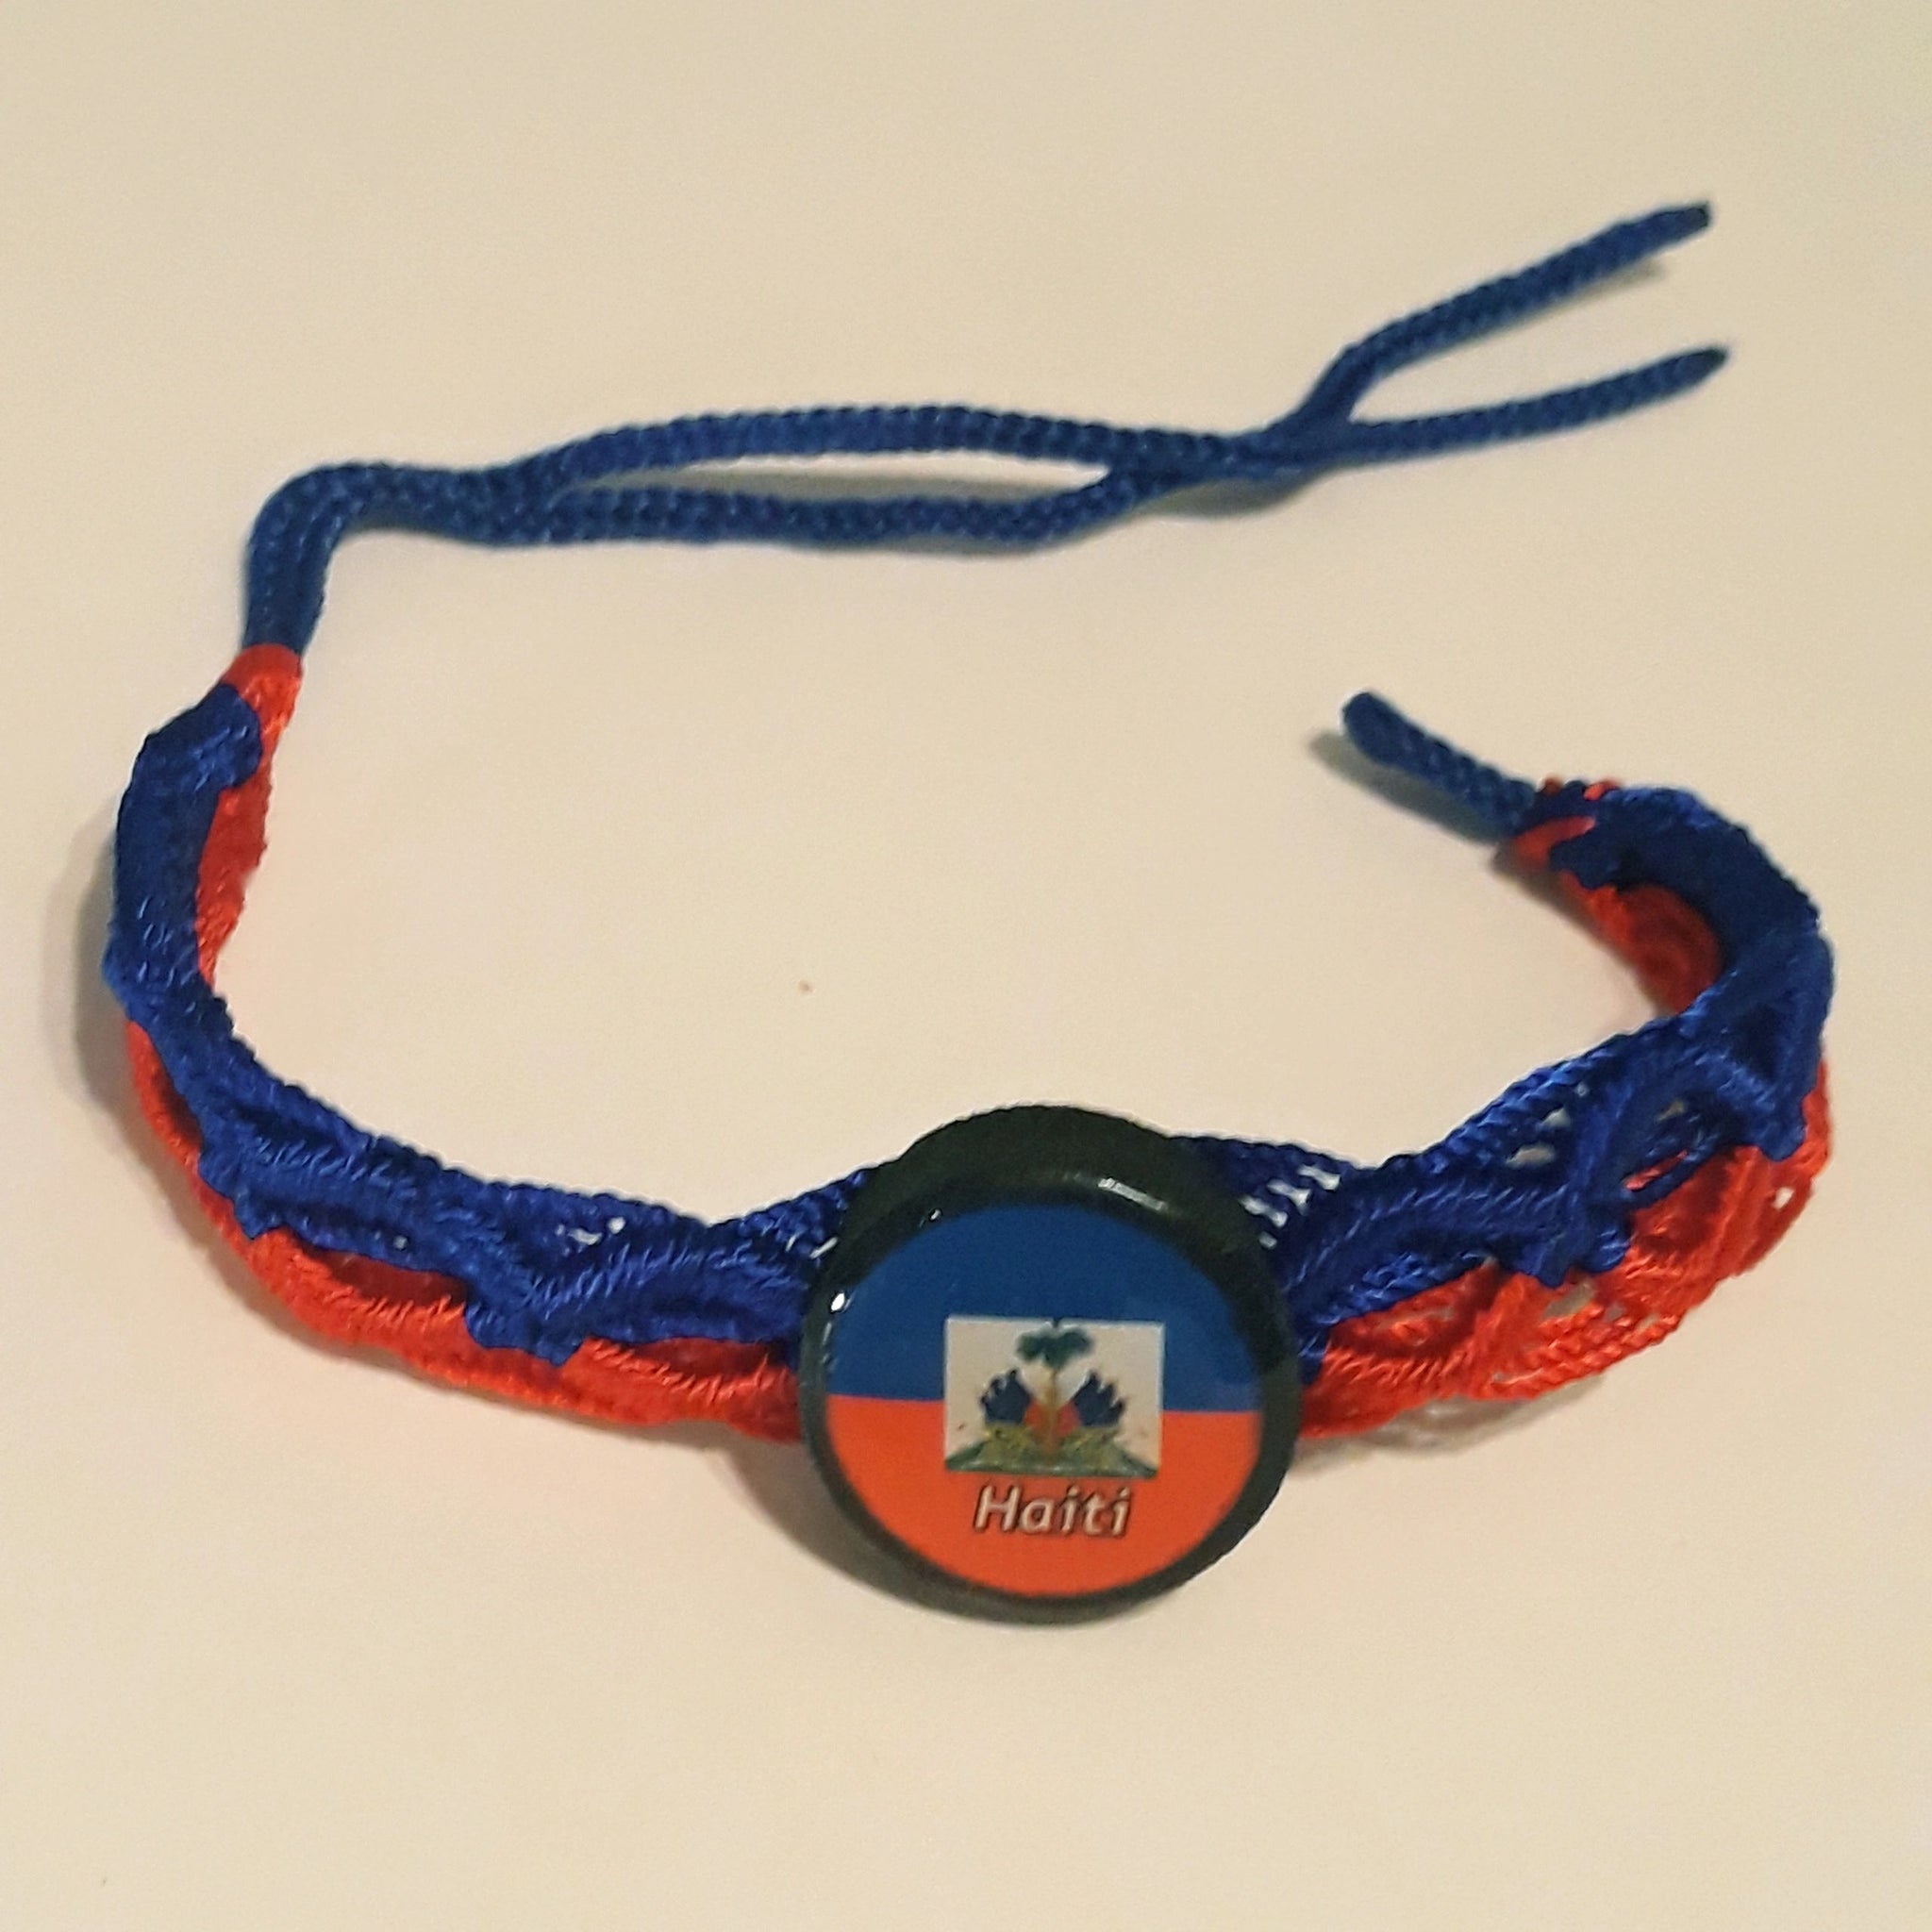 knit bracelets with caribbean country flags